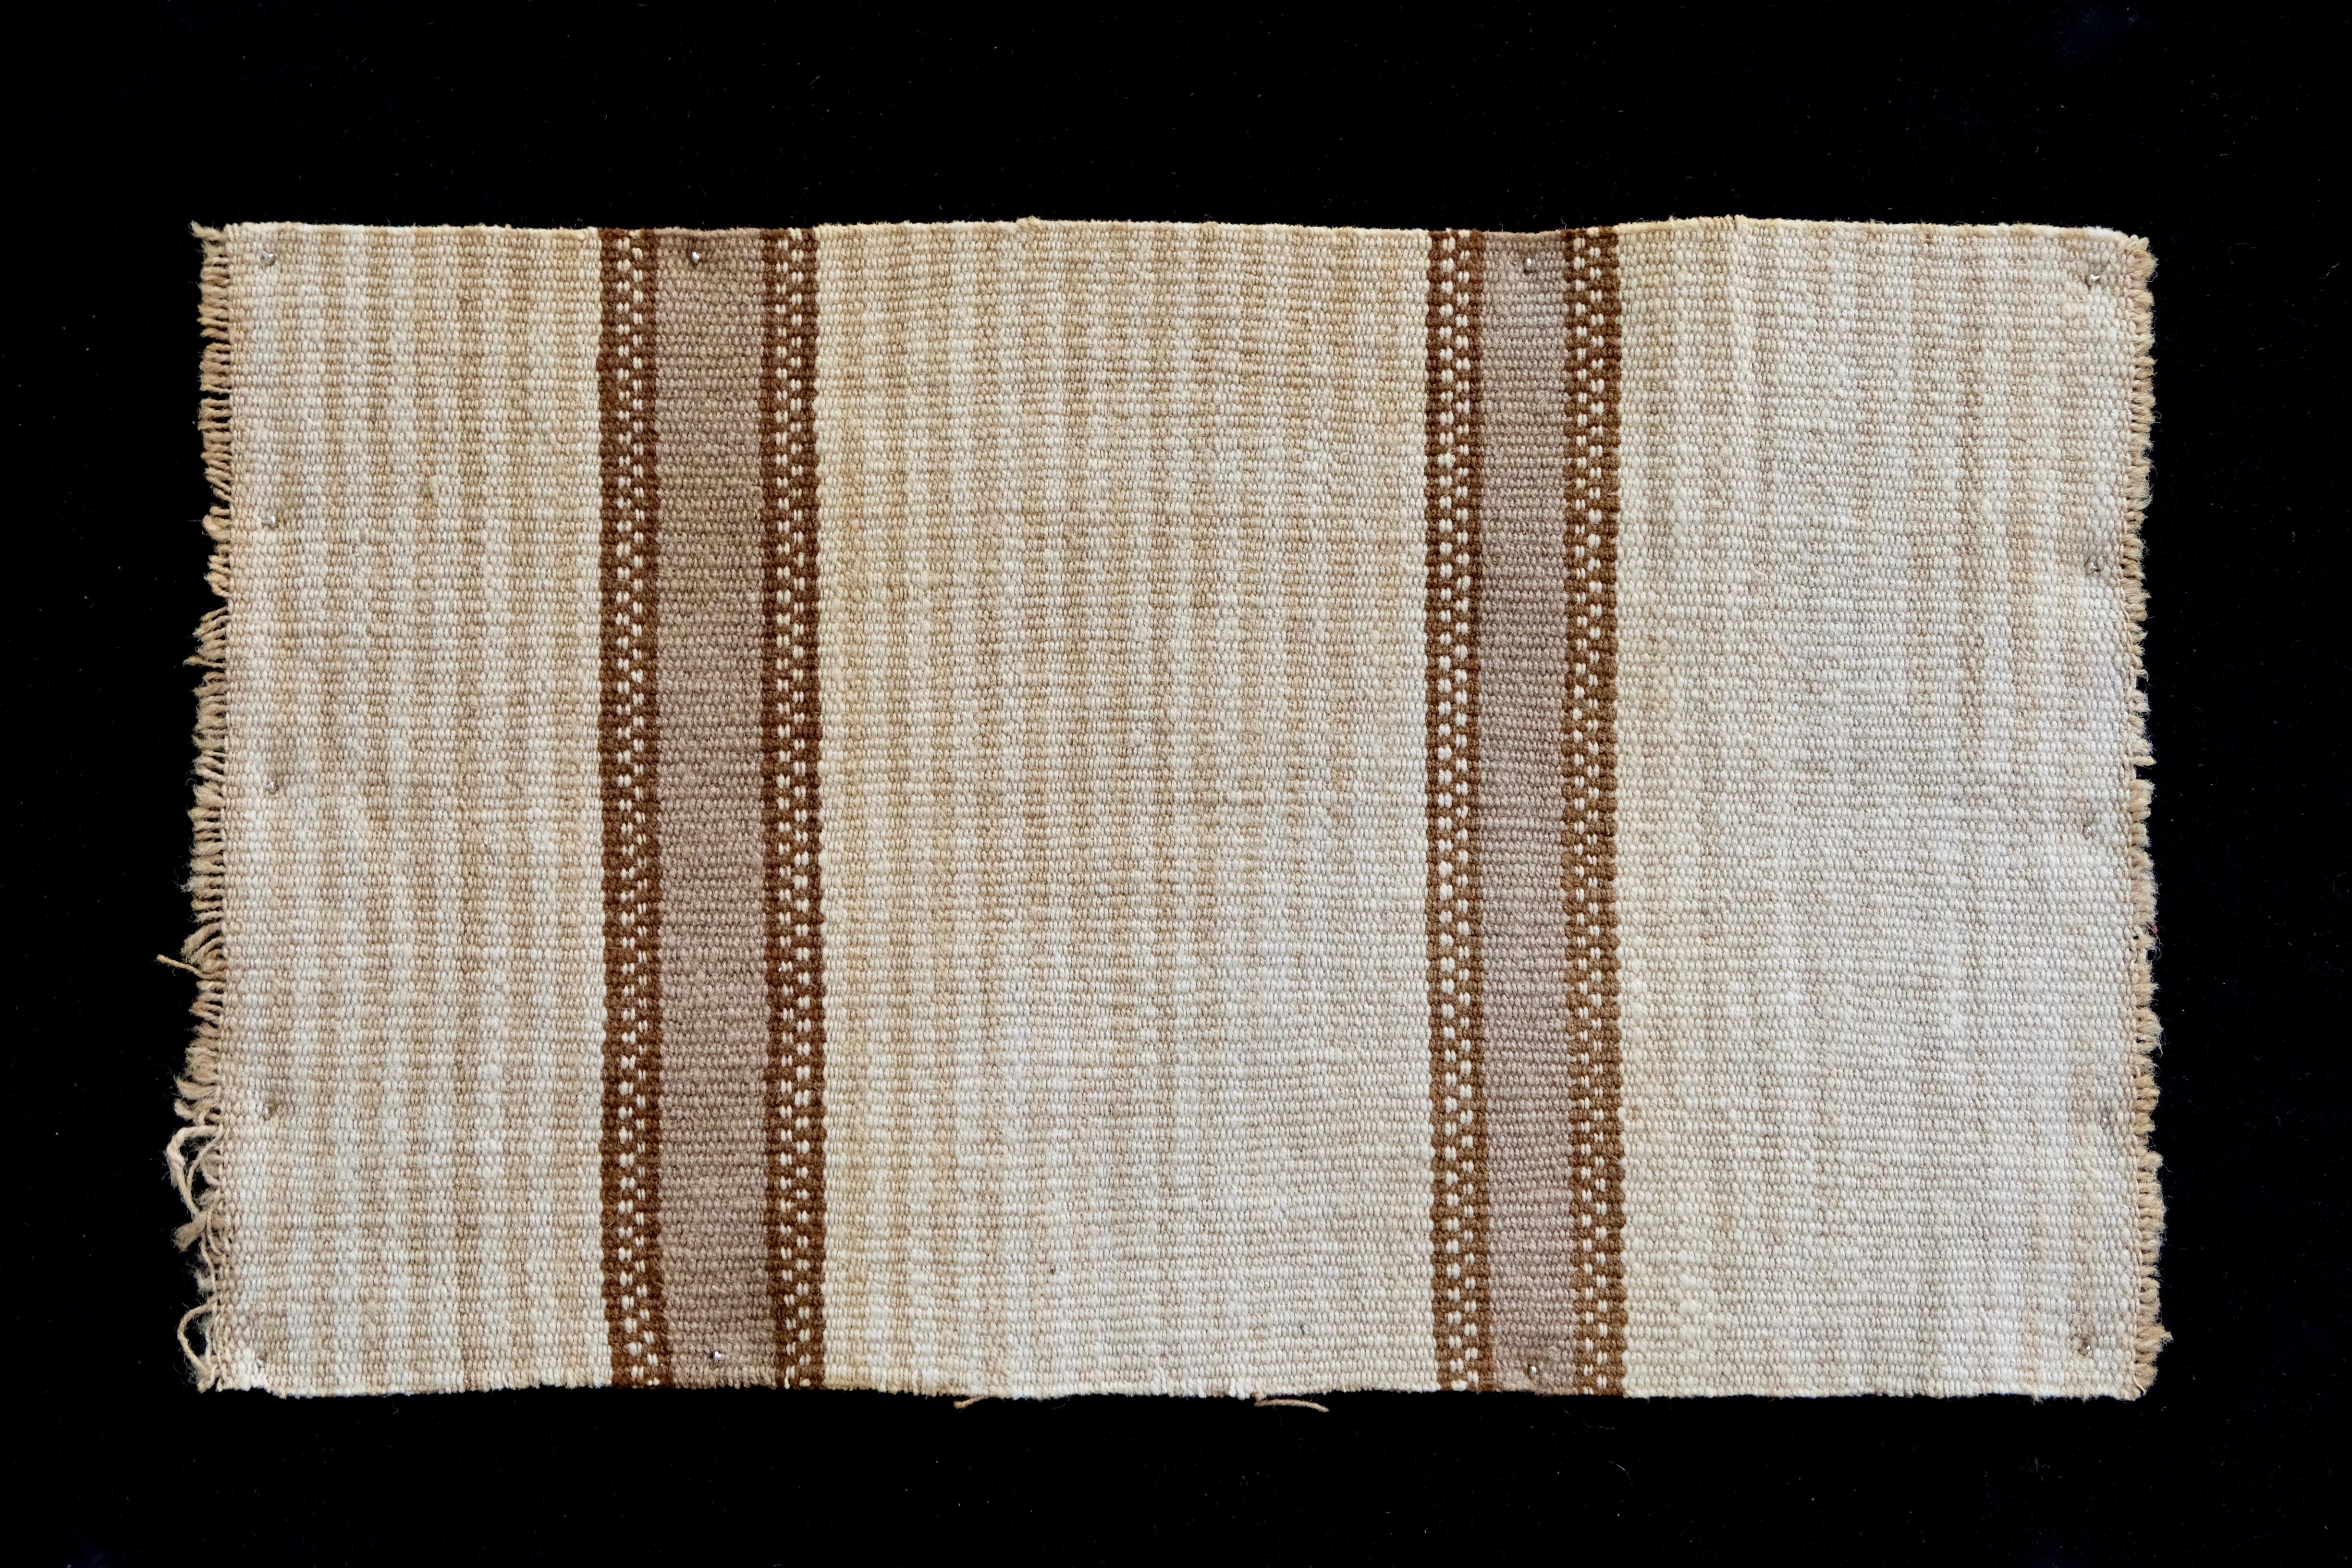 Earth tones adorn this striped pattern pre-Columbian textile.

It is a wonder to behold antiquities such as a pre-Columbian textiles, an authentic piece of art that has been preserved for centuries and that survives generation after generation.